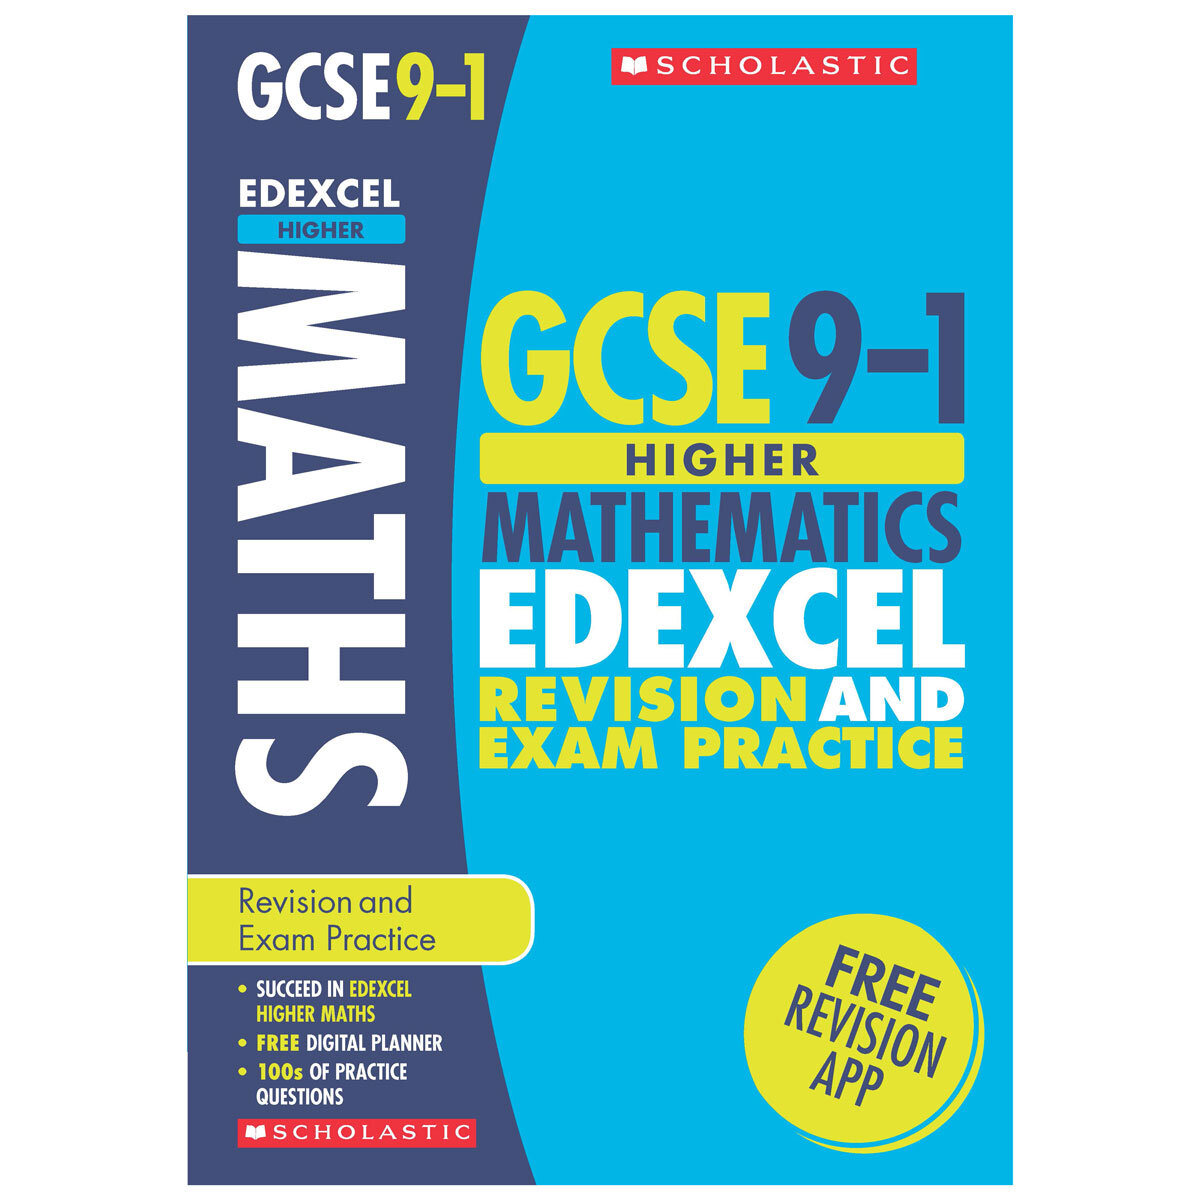 Scholastic GCSE Maths Revision Guide & Exam Practice Workbook in 4 Options